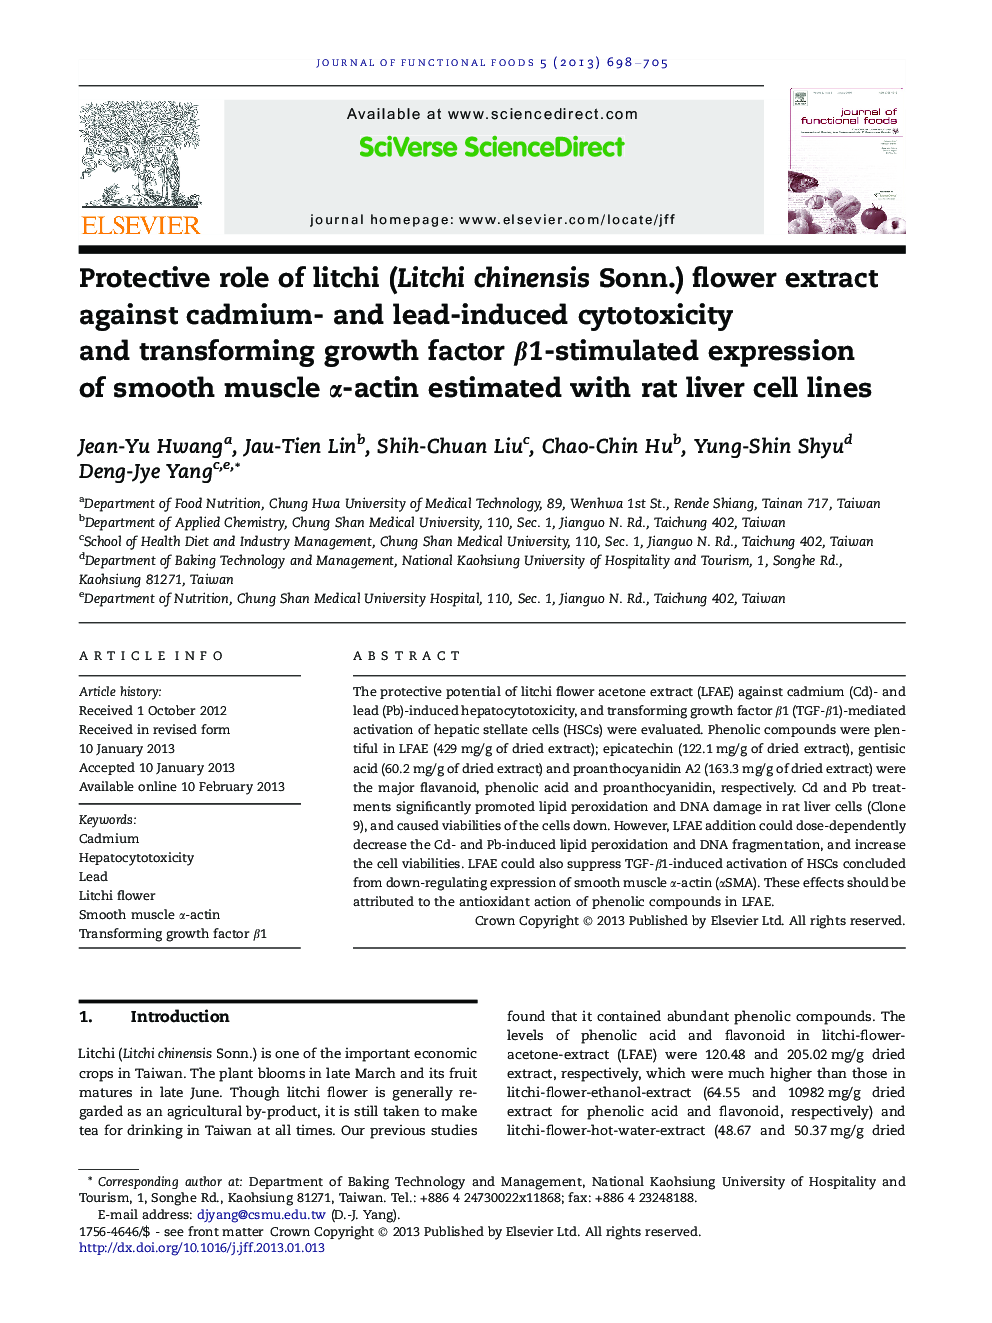 Protective role of litchi (Litchi chinensis Sonn.) flower extract against cadmium- and lead-induced cytotoxicity and transforming growth factor Î²1-stimulated expression of smooth muscle Î±-actin estimated with rat liver cell lines